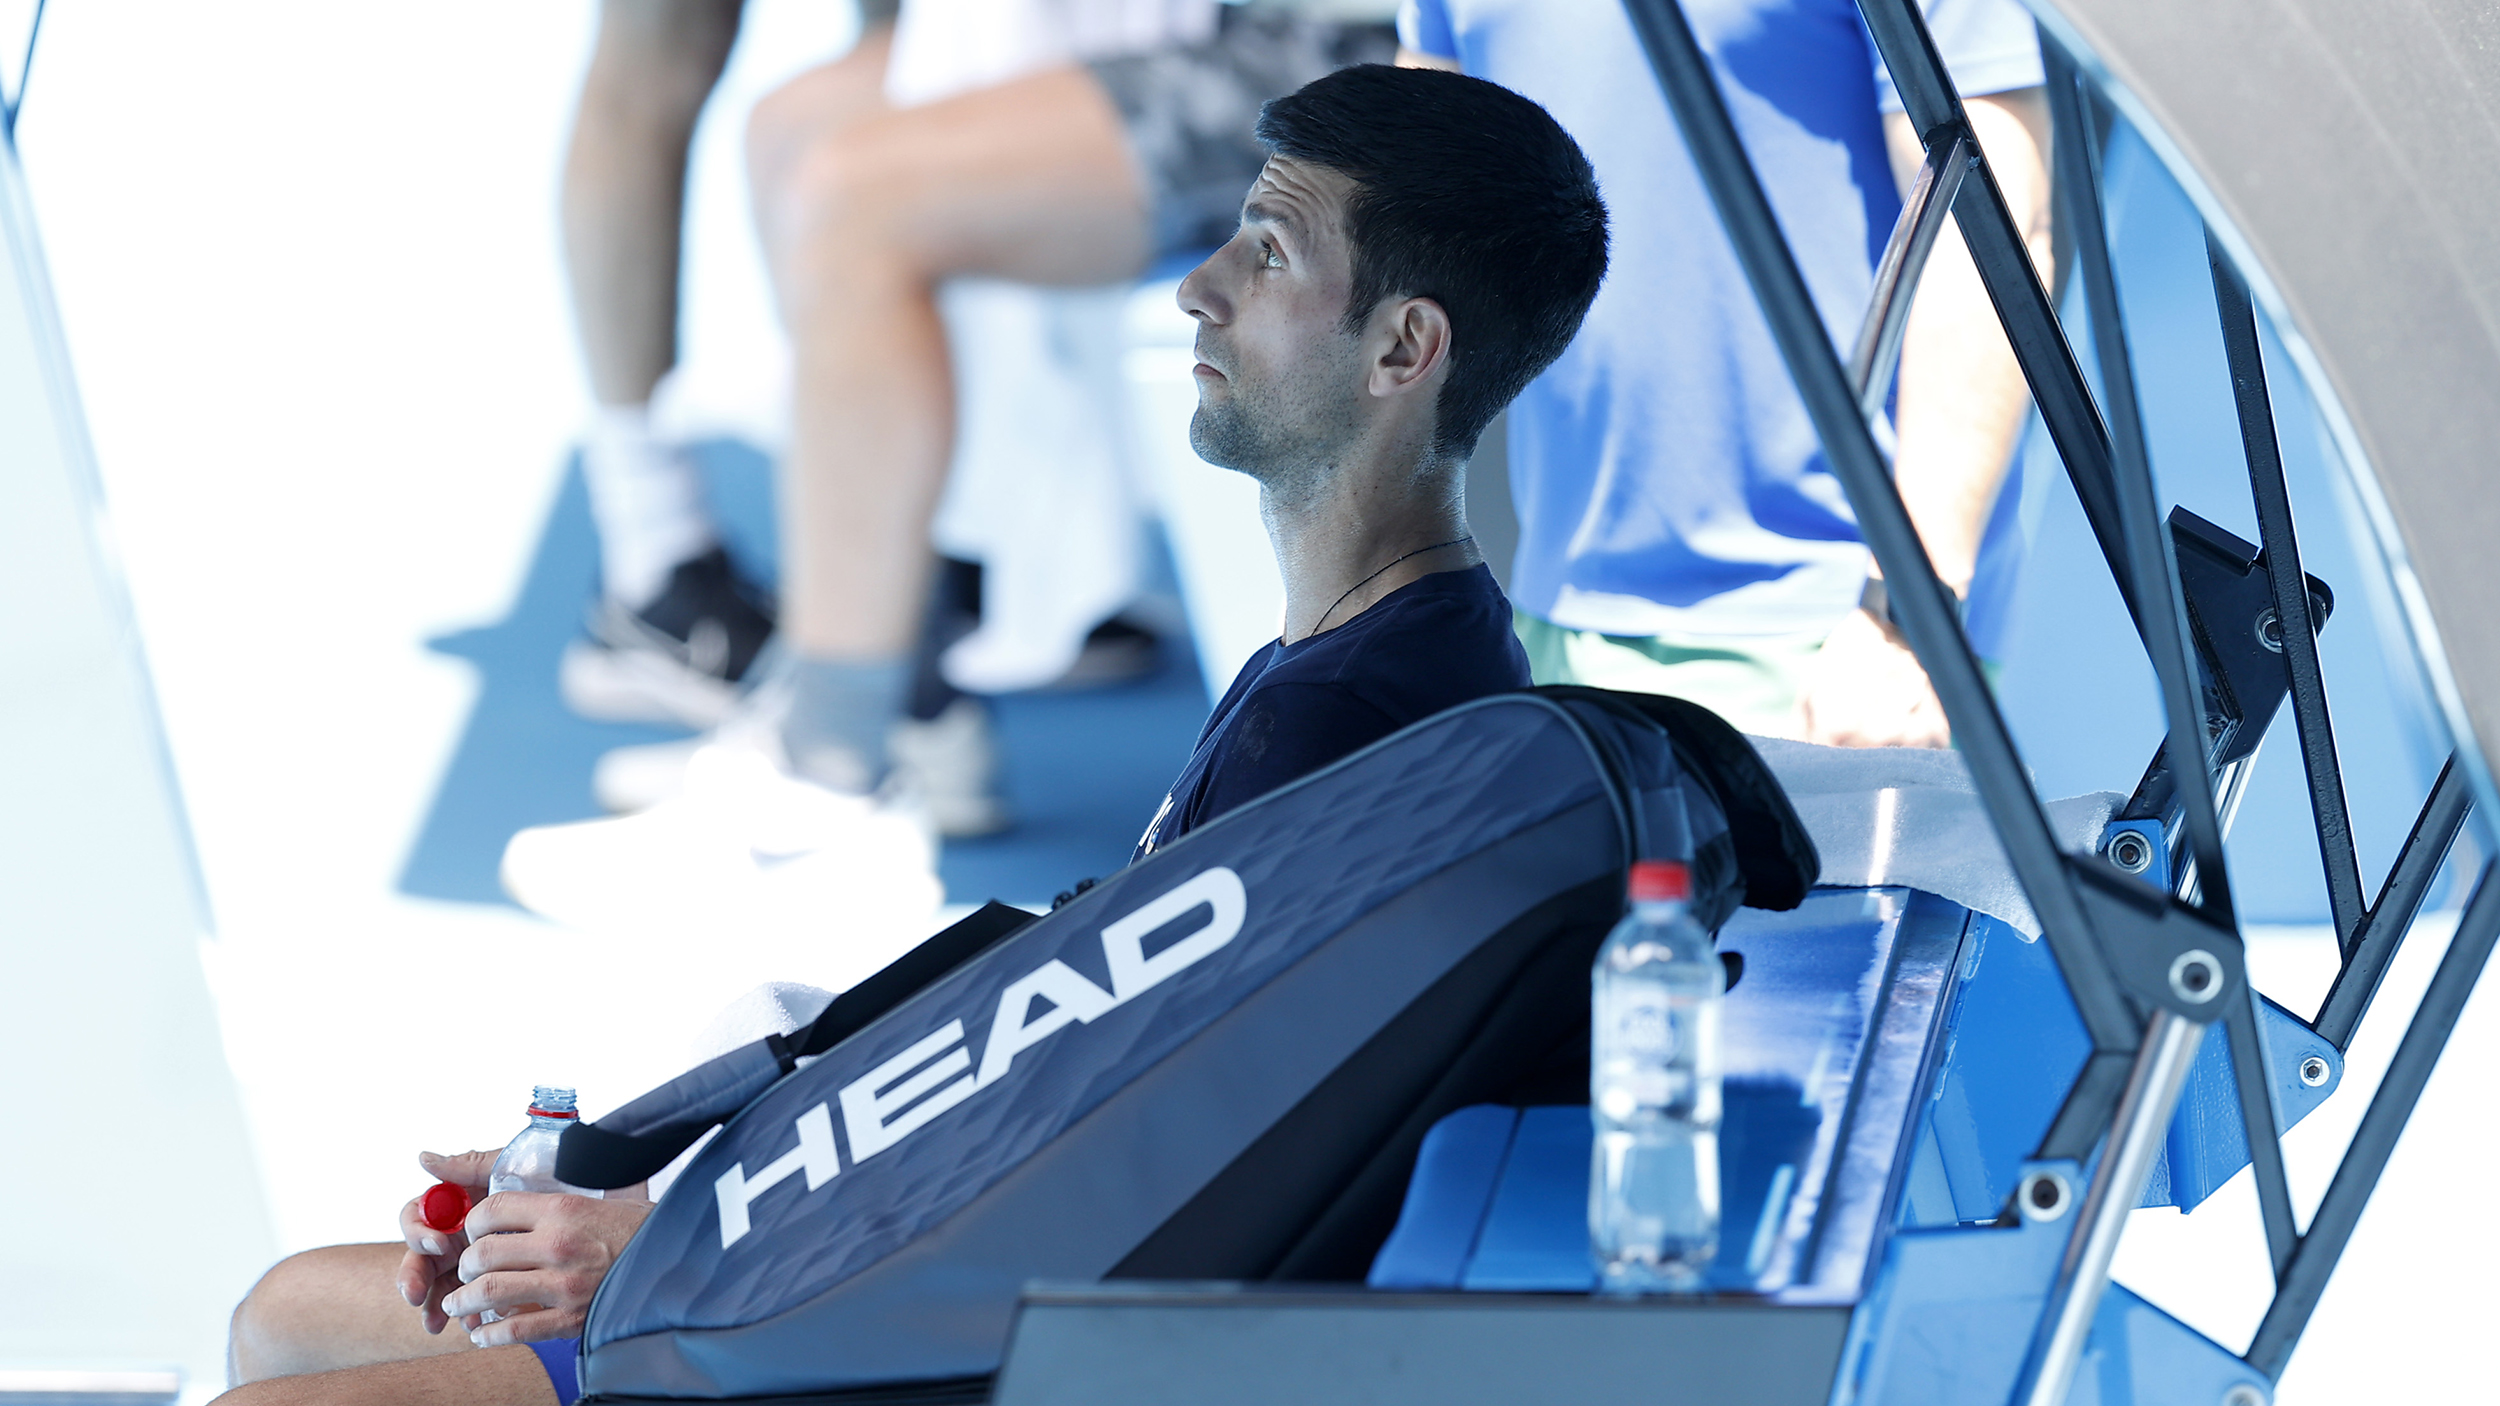 Novak Djokovic of Serbia is seen during a practice session ahead of the 2022 Australian Open at Melbourne Park on January 12, 2022 in Melbourne, Australia.